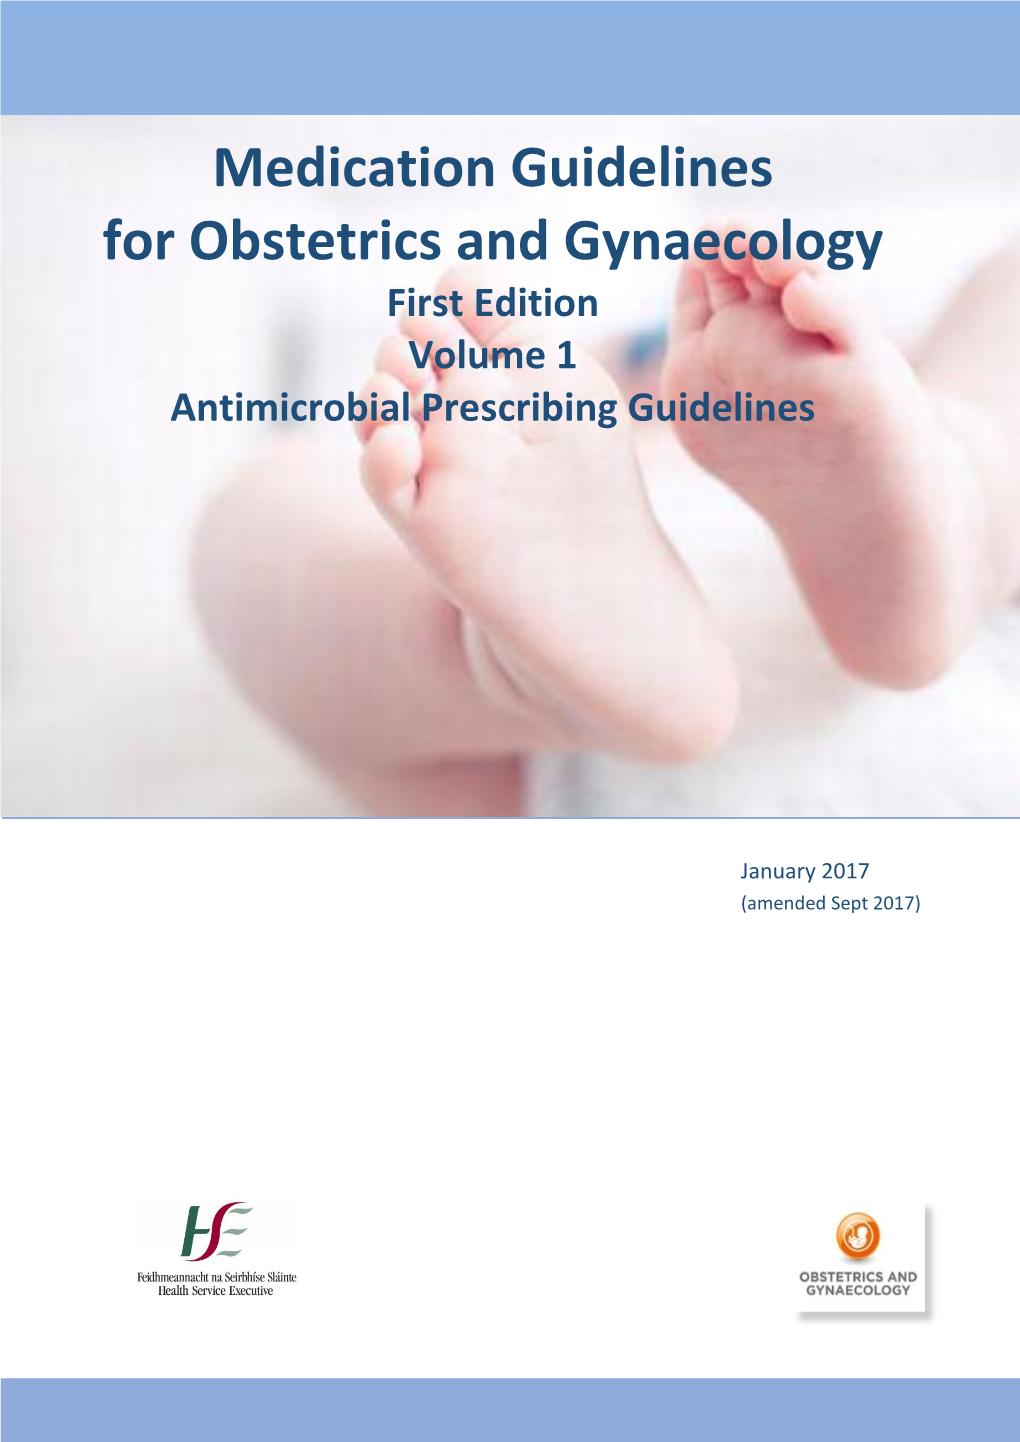 Medication Guidelines for Obstetrics and Gynaecology First Edition Volume 1 Antimicrobial Prescribing Guidelines